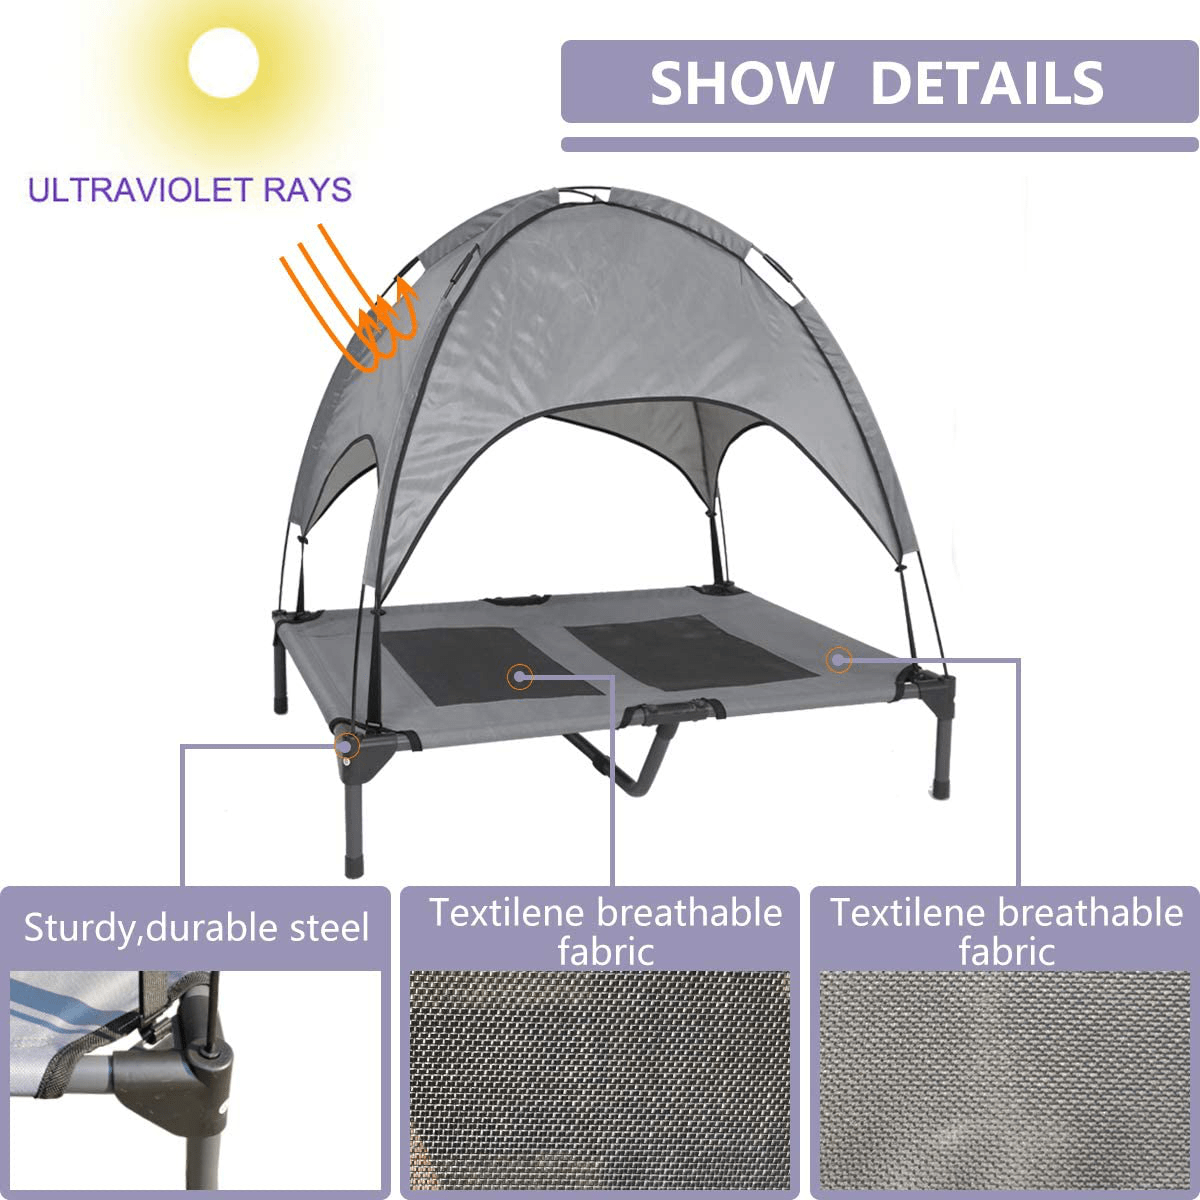 A.FATI Elevated Dog Bed,Cooling Raised Dog Bed Outdoor & Indoor Dog Cot Bed for Large Dogs with Removable Canopy Shade Tent with Extra Bag, Portable for Camping, Traveling, Beach, Training Use Animals & Pet Supplies > Pet Supplies > Dog Supplies > Dog Houses A.FATI   